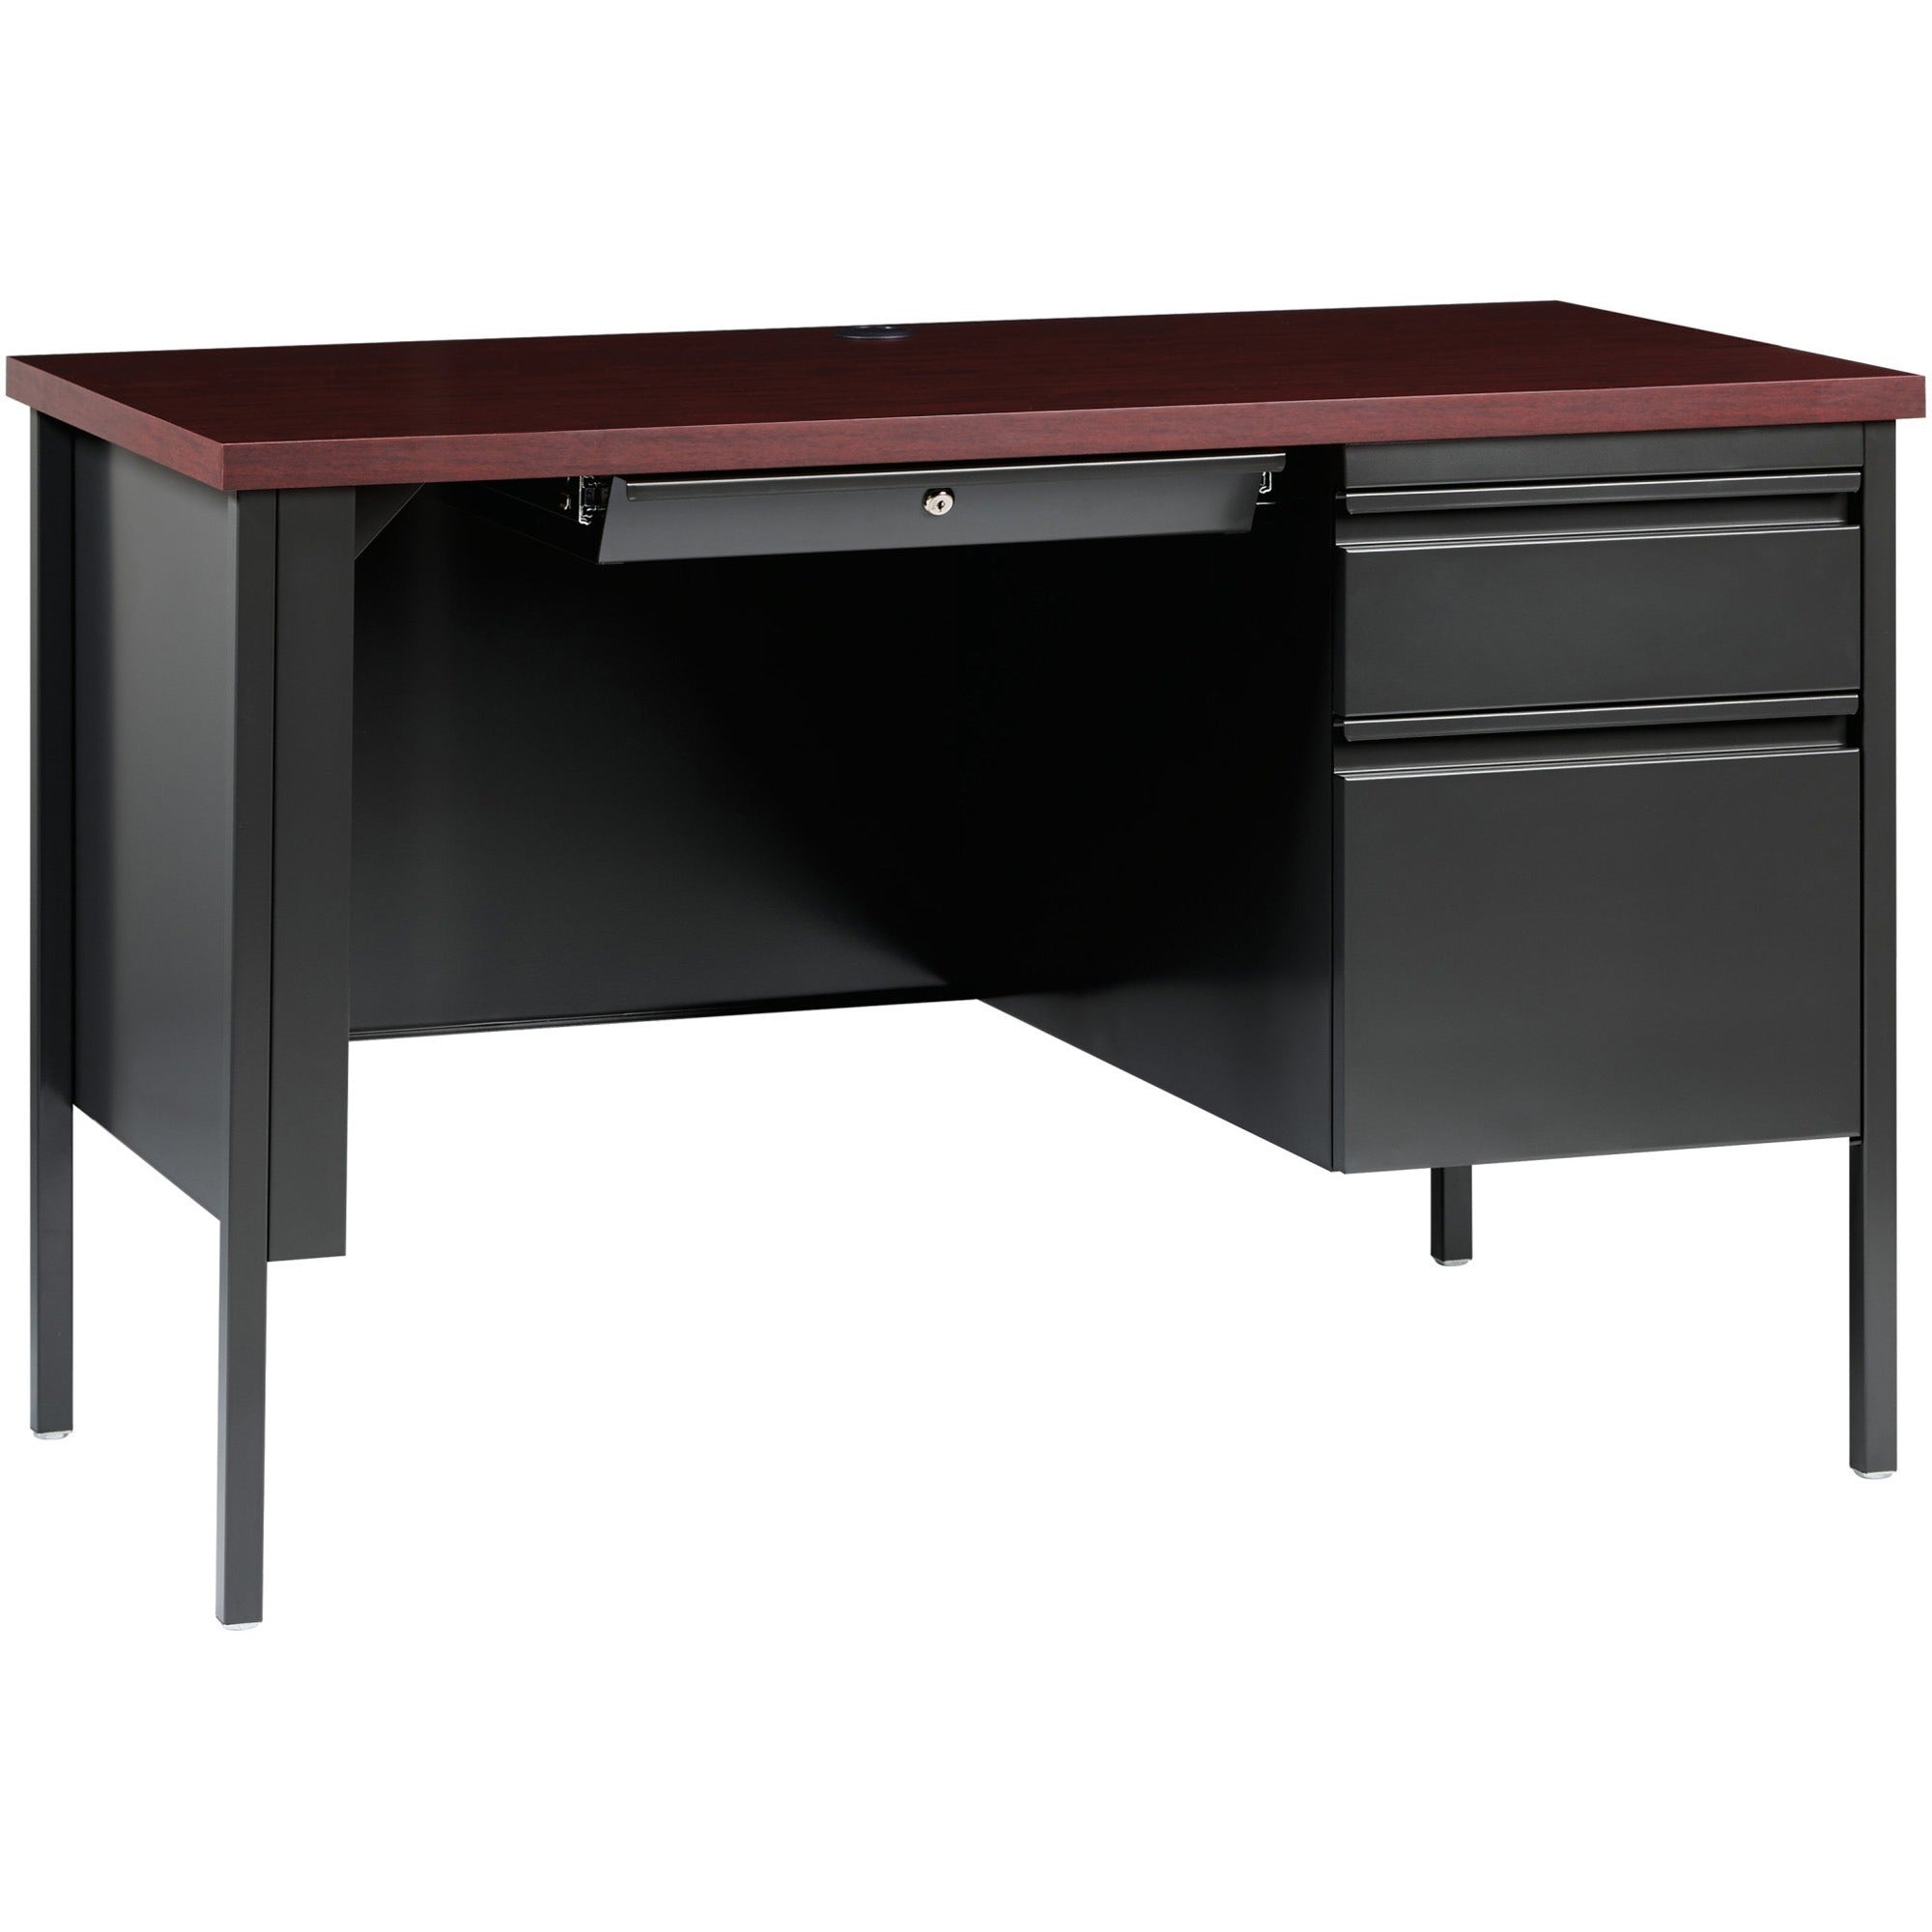 lorell-fortress-series-45-1-2-right-single-pedestal-desk-455-x-24295--11-top-box-file-drawers-single-pedestal-on-right-side-square-edge_llr66949 - 1